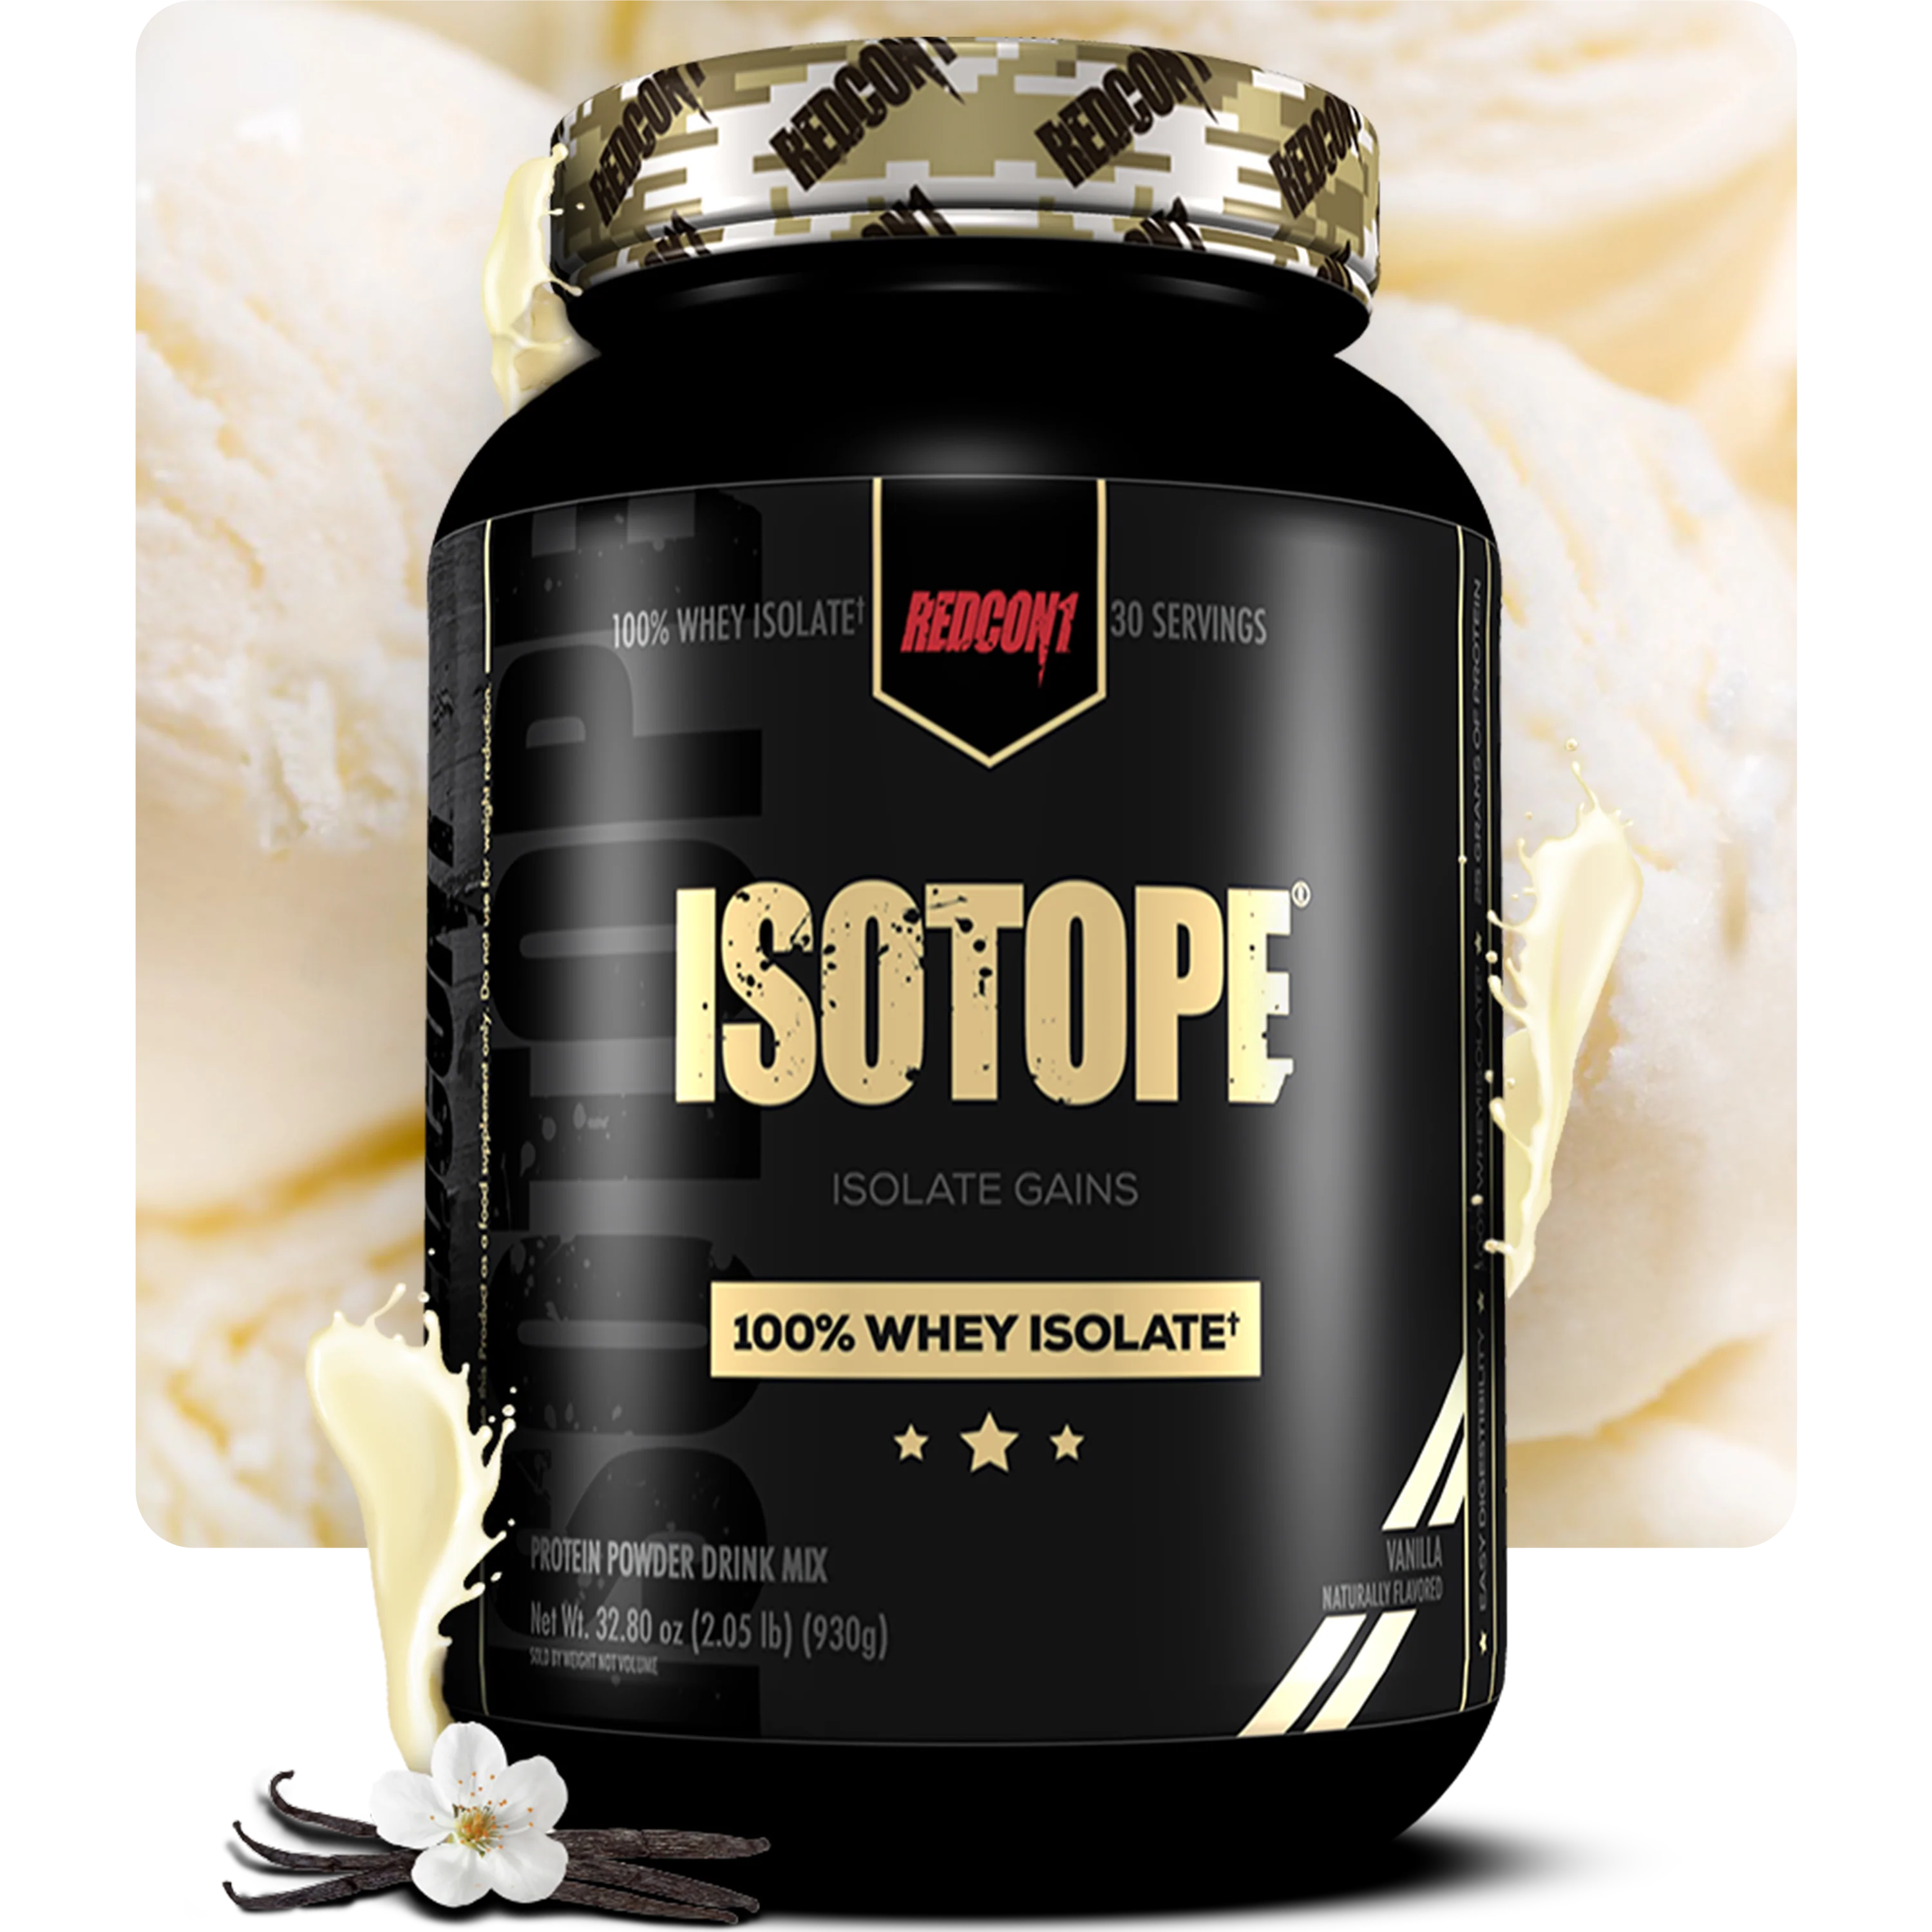 Redcon1 ISOTOPE 100% Whey Isolate 1026g